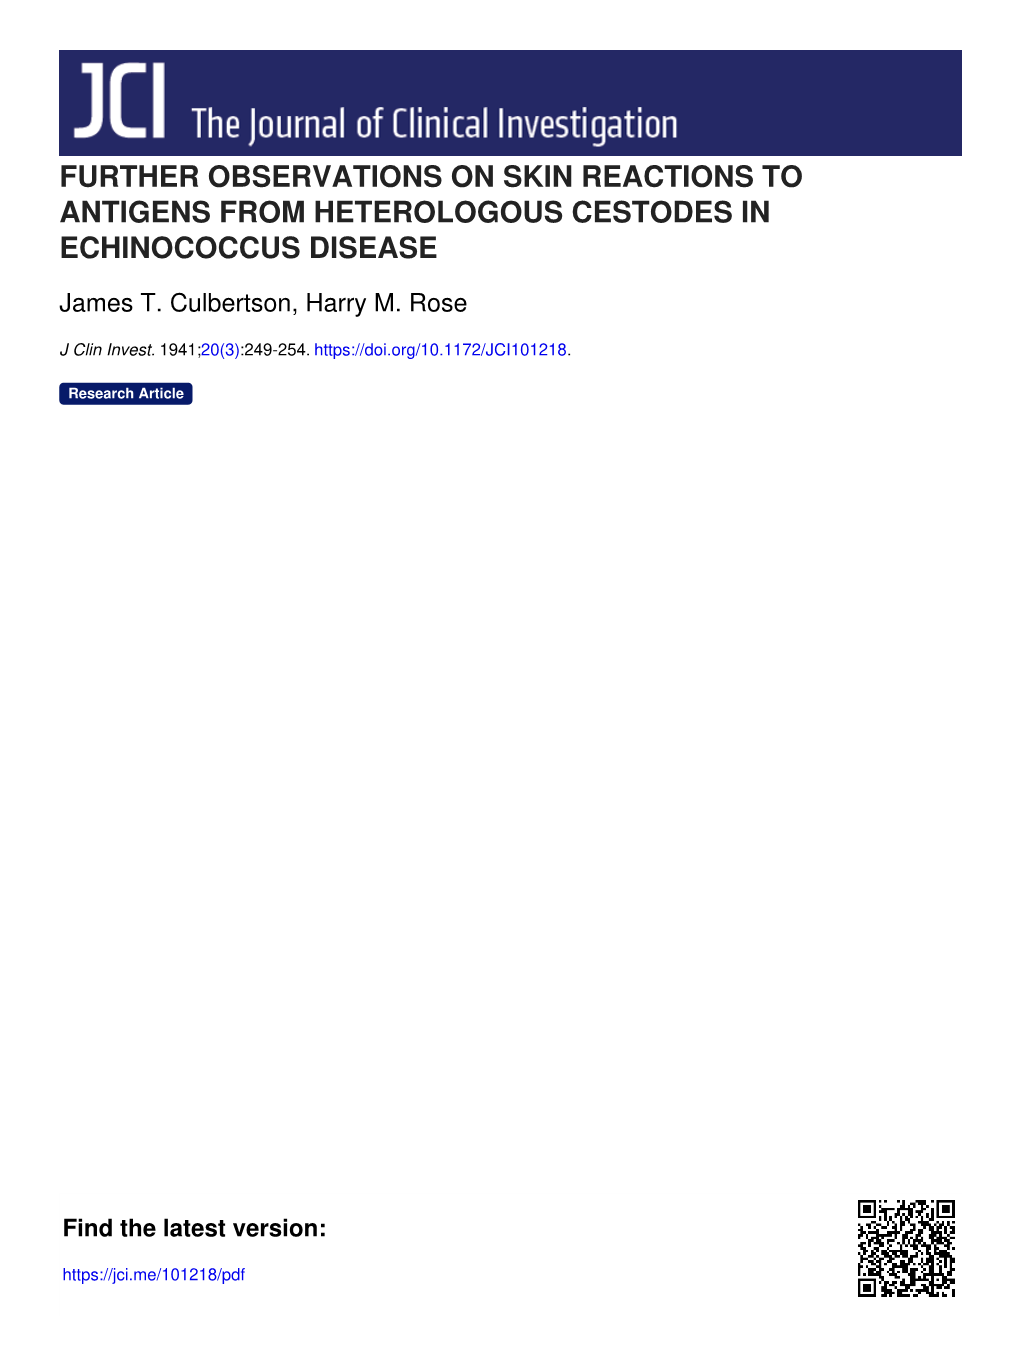 Further Observations on Skin Reactions to Antigens from Heterologous Cestodes in Echinococcus Disease